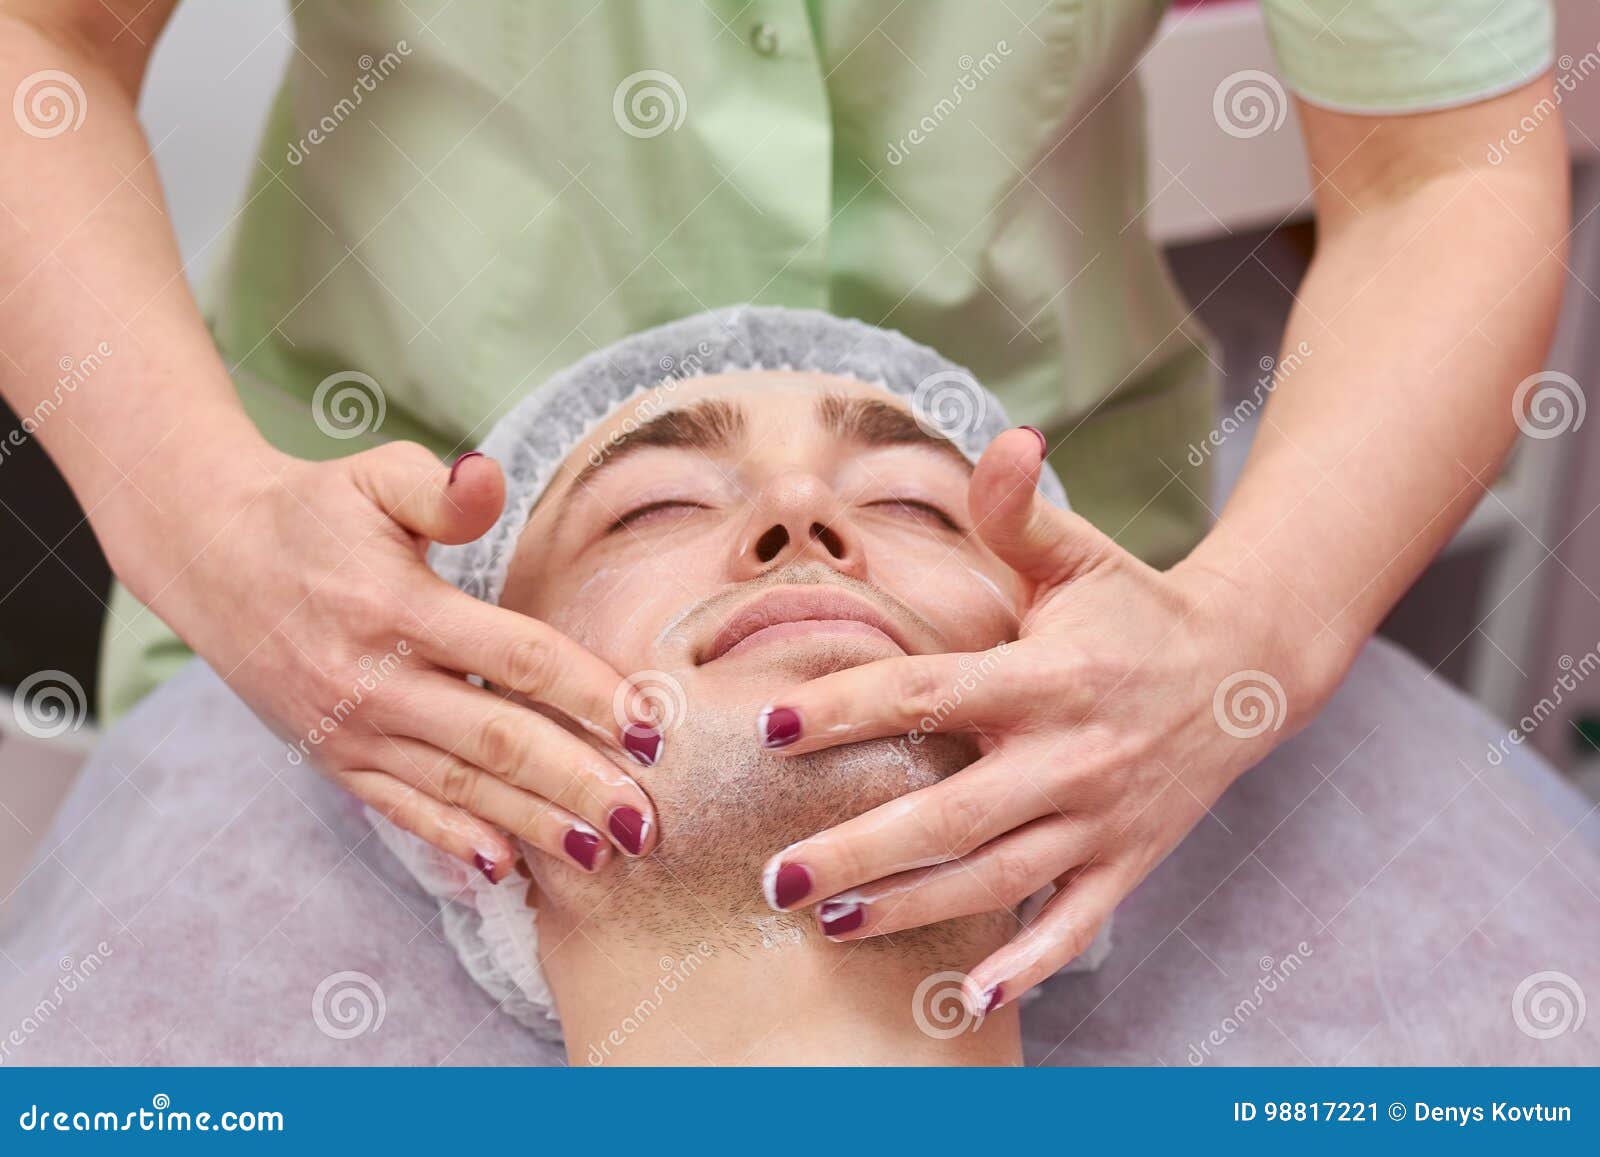 Female Hands Massaging Male Face Stock Image Image Of Male Closeup